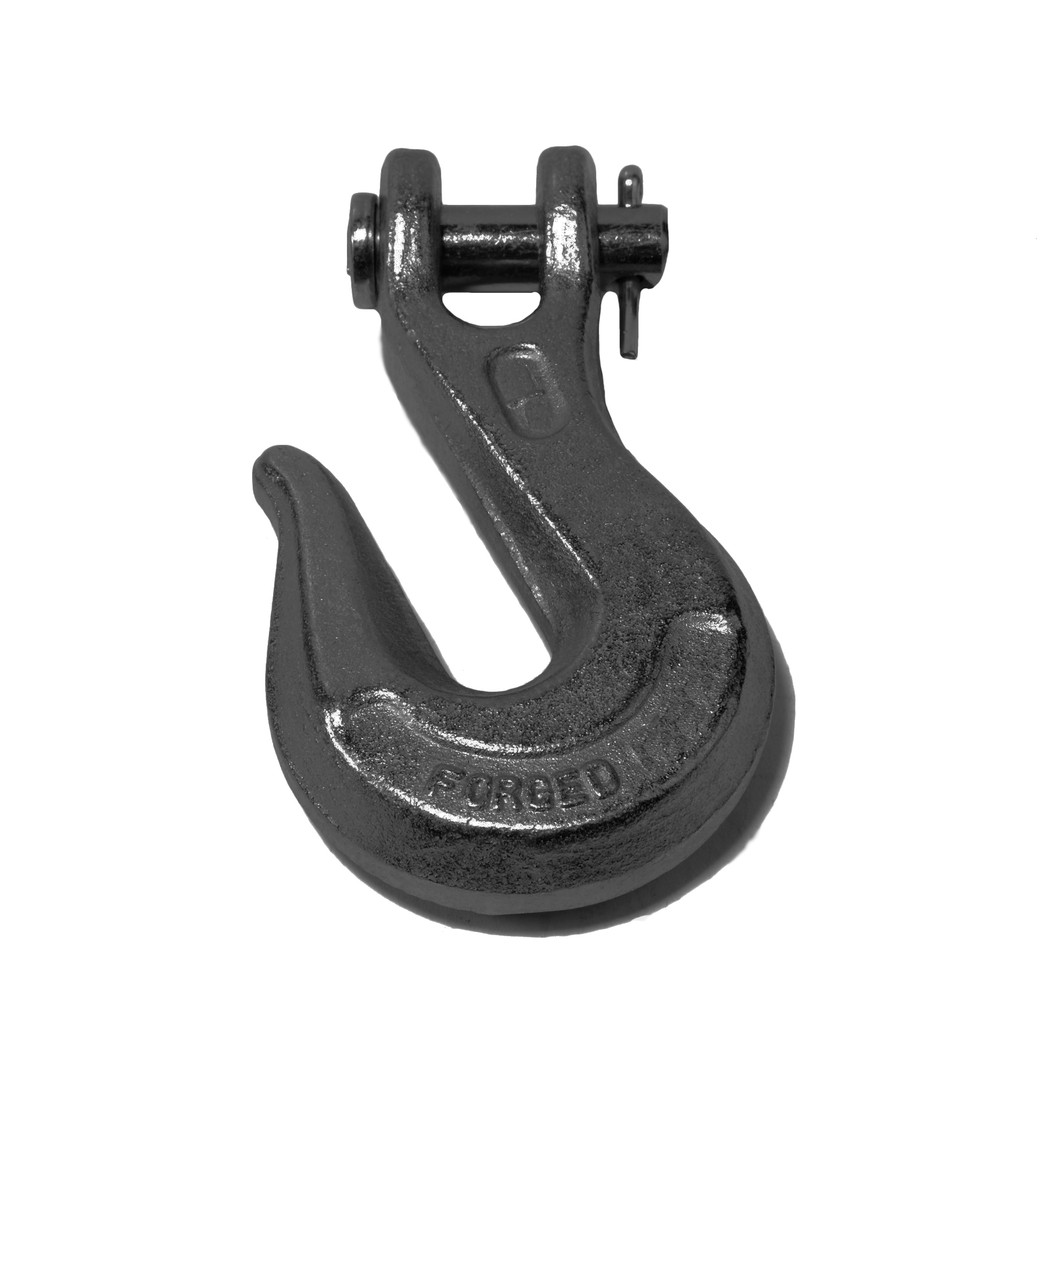 1/2 G80 Alloy Clevis Grab Hook, 12,000 lbs. WLL, Import.